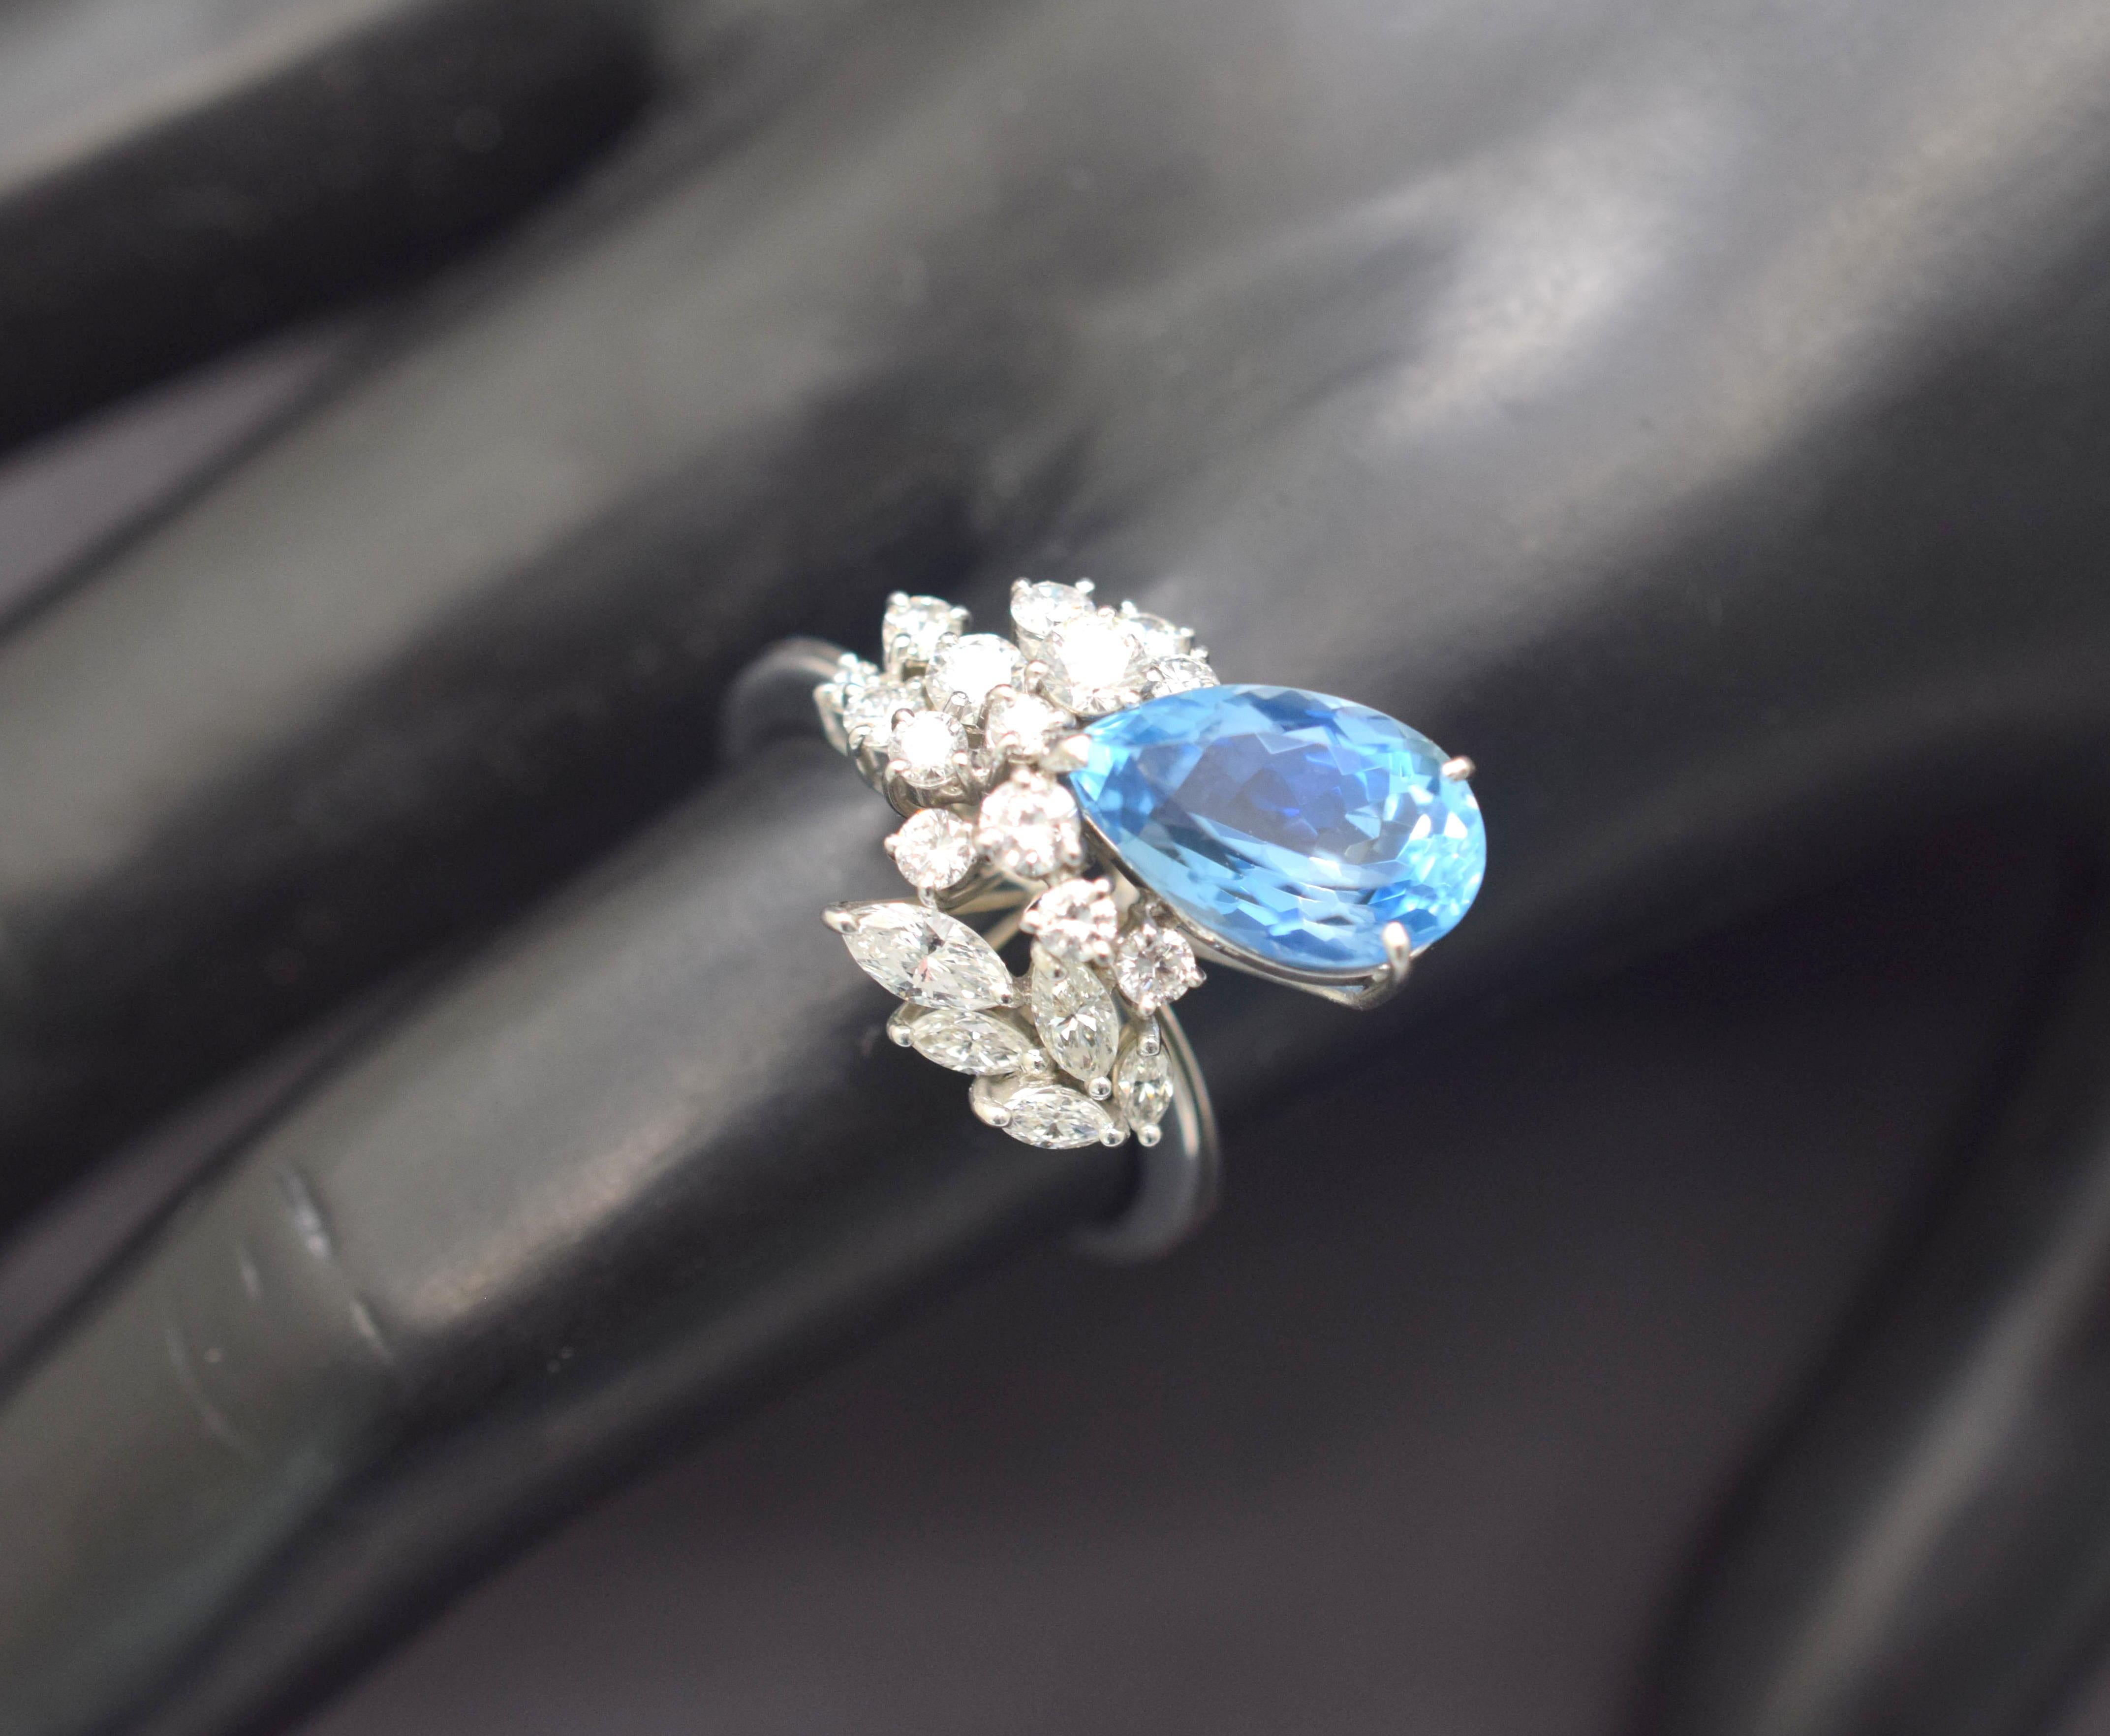 Gorgeous design from famed designer H. Stern. This ring is crafted in 18k white gold. This ring is highlighted by a fantastic pear shape Santa Maria Aqua Marine.  The Aqua Marine shows a deep blue hue found in the highest gem quality Aqua Marines.